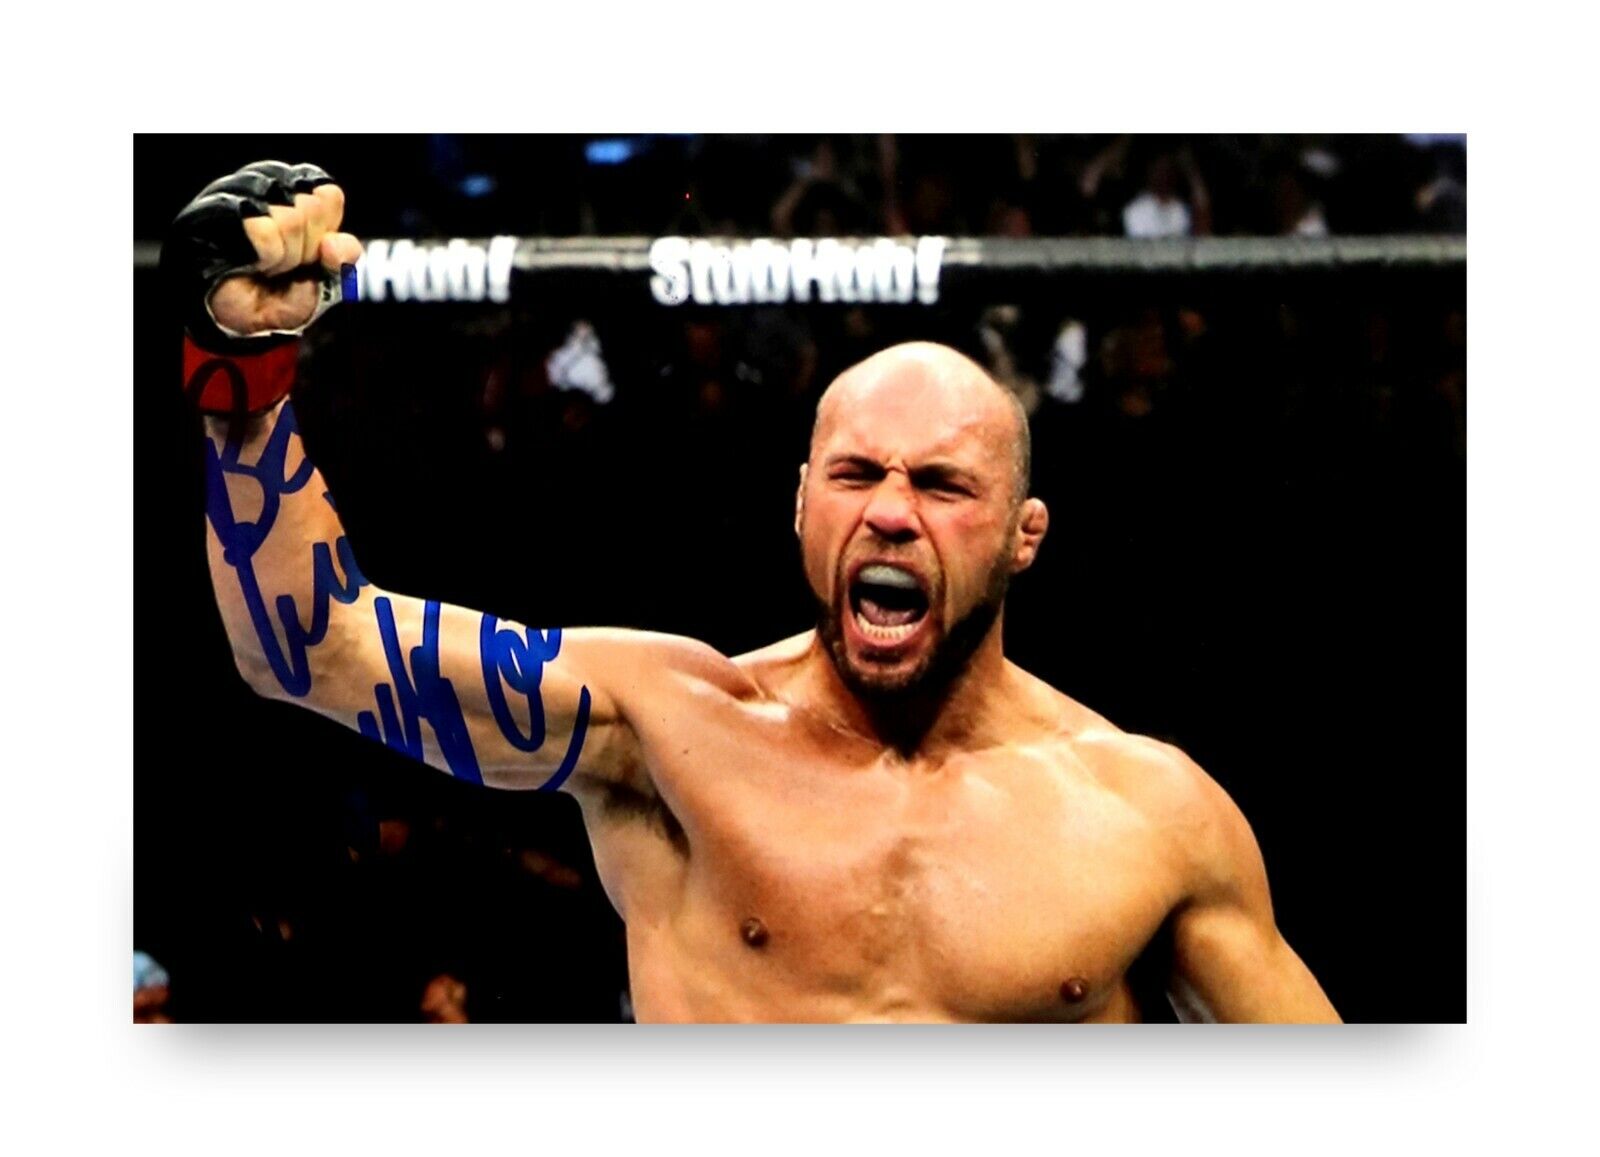 Randy Couture Signed 6x4 Photo Poster painting UFC Light Heavyweight Champion MMA Autograph +COA